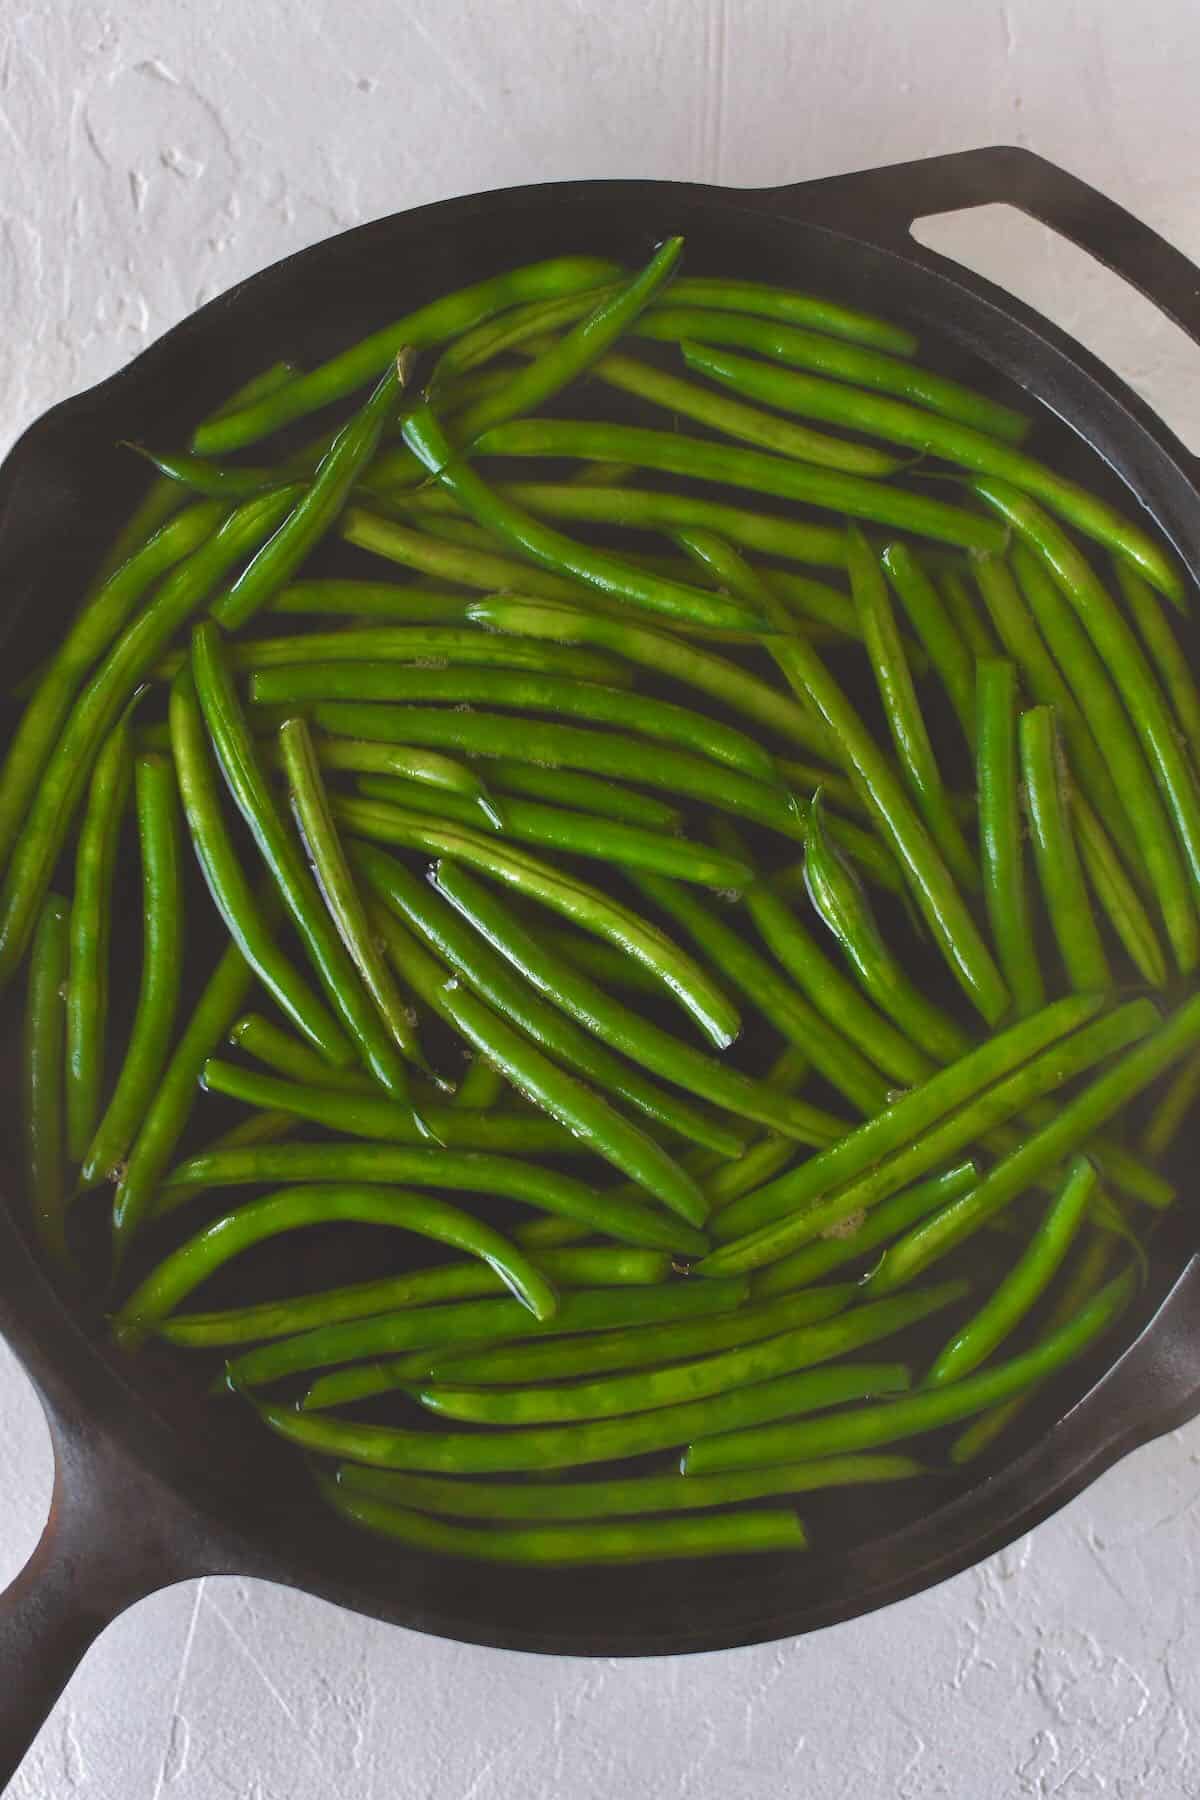 Boiling the green beans in the skillet before sauteing.